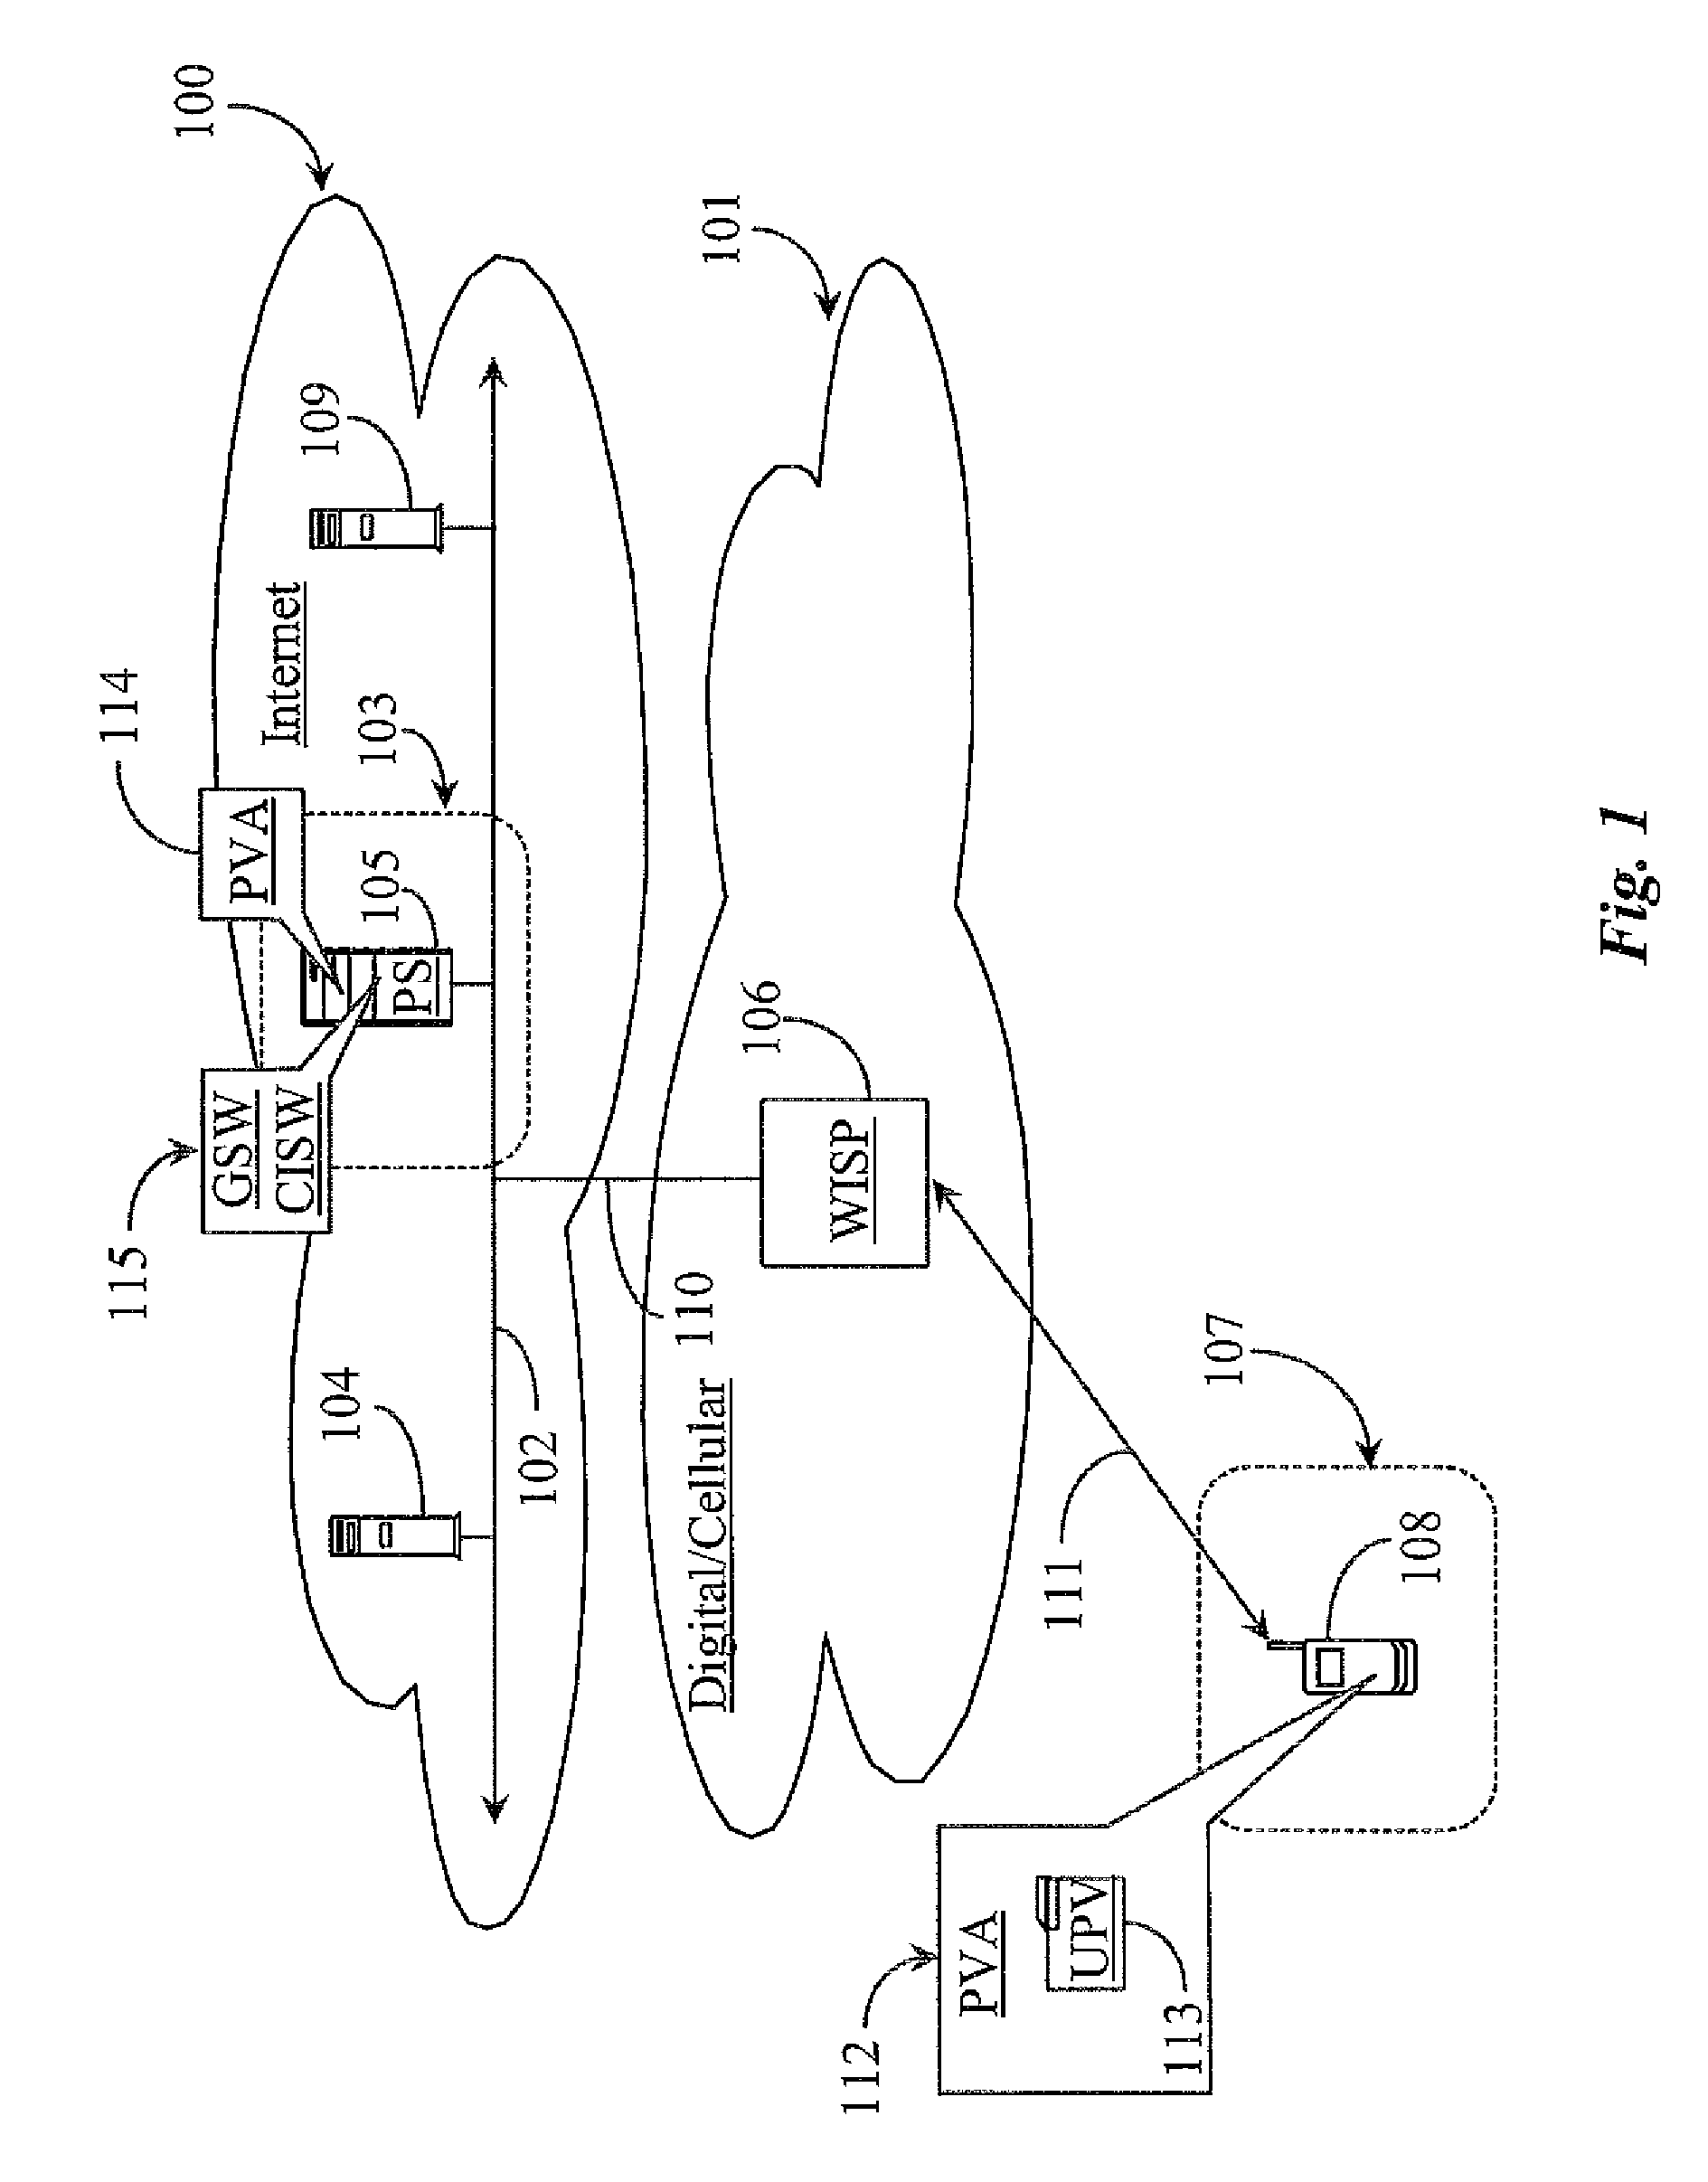 System for performing web authentication of a user by proxy